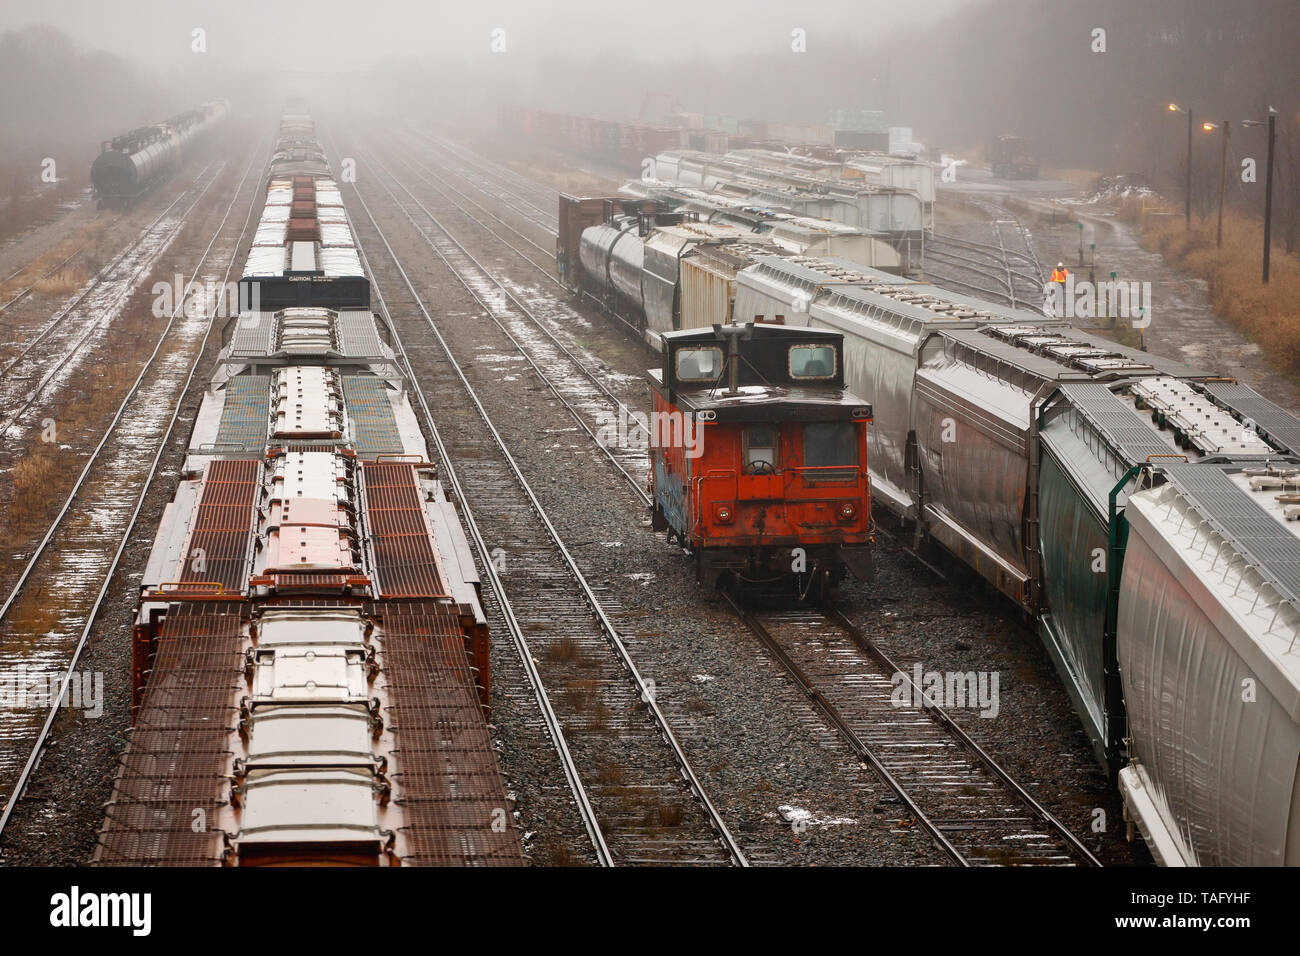 View of rail yard on a wet and foggy day. Stock Photo